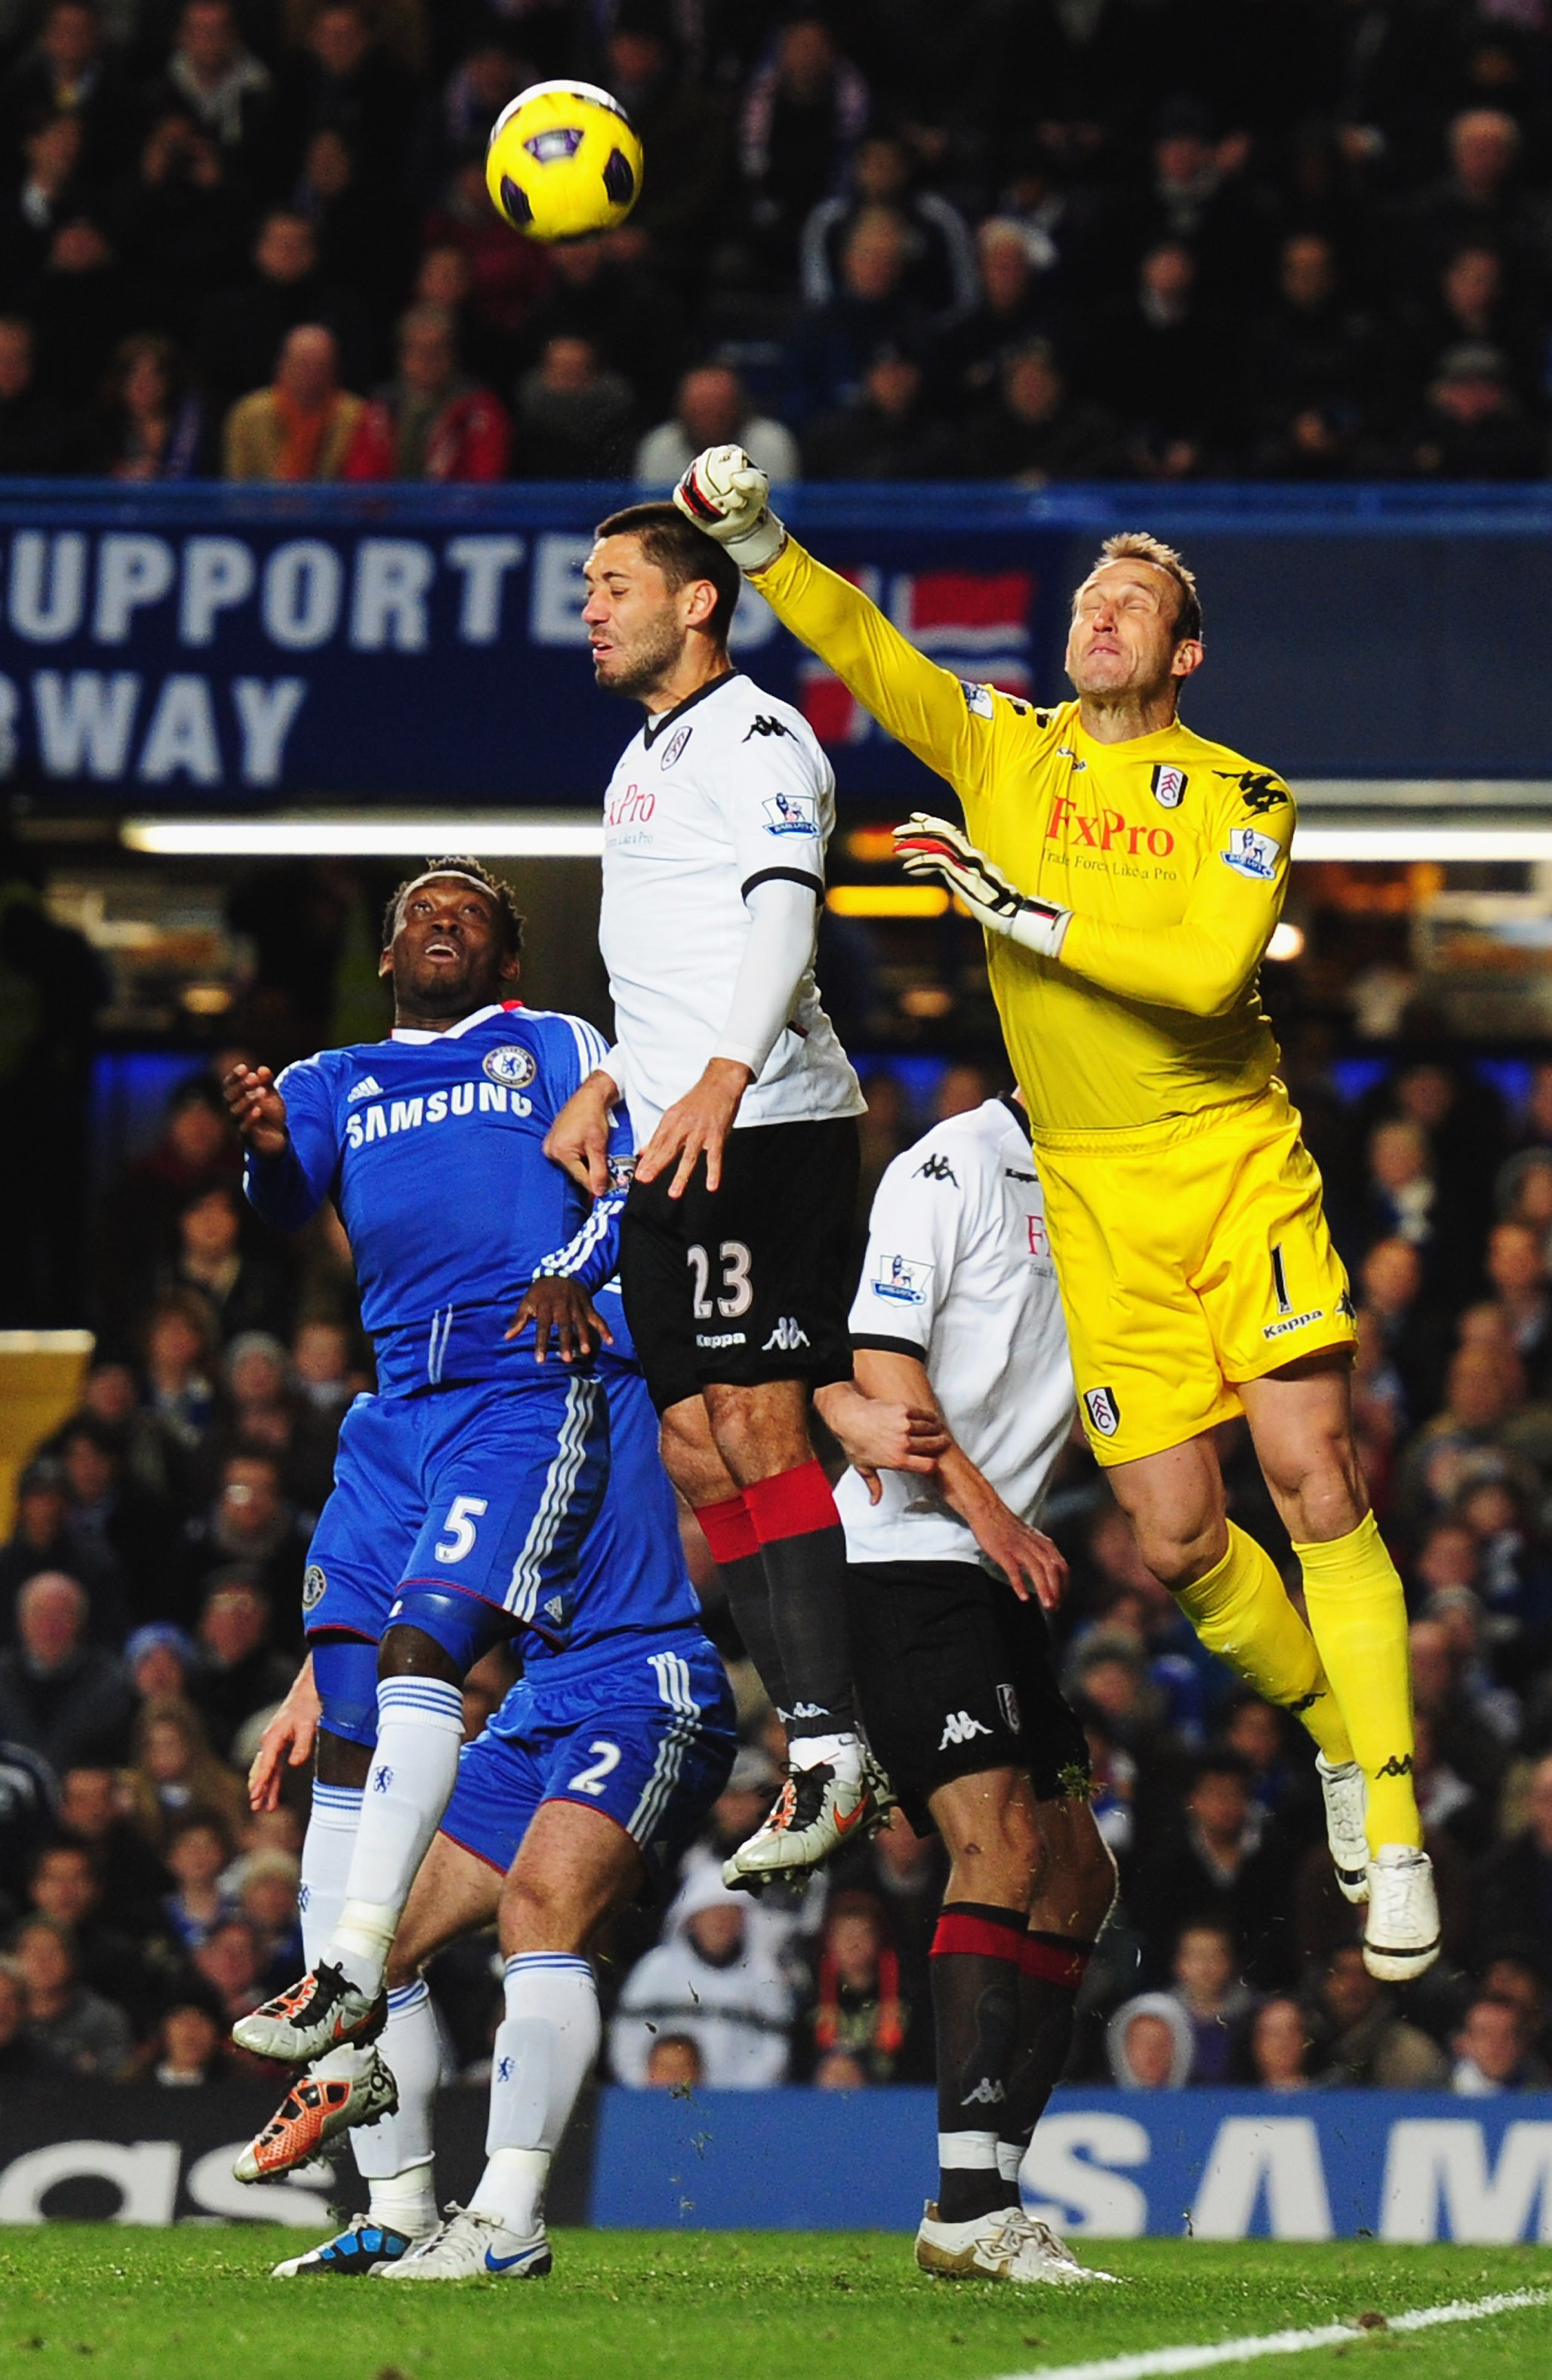 LONDON, ENGLAND - NOVEMBER 10:  Clint Dempsey (23) and Mark Schwarzer of Fulham foil Michael Essien of Chelsea during the Barclays Premier League match between Chelsea and Fulham at Stamford Bridge on November 10, 2010 in London, England.  (Photo by Mike